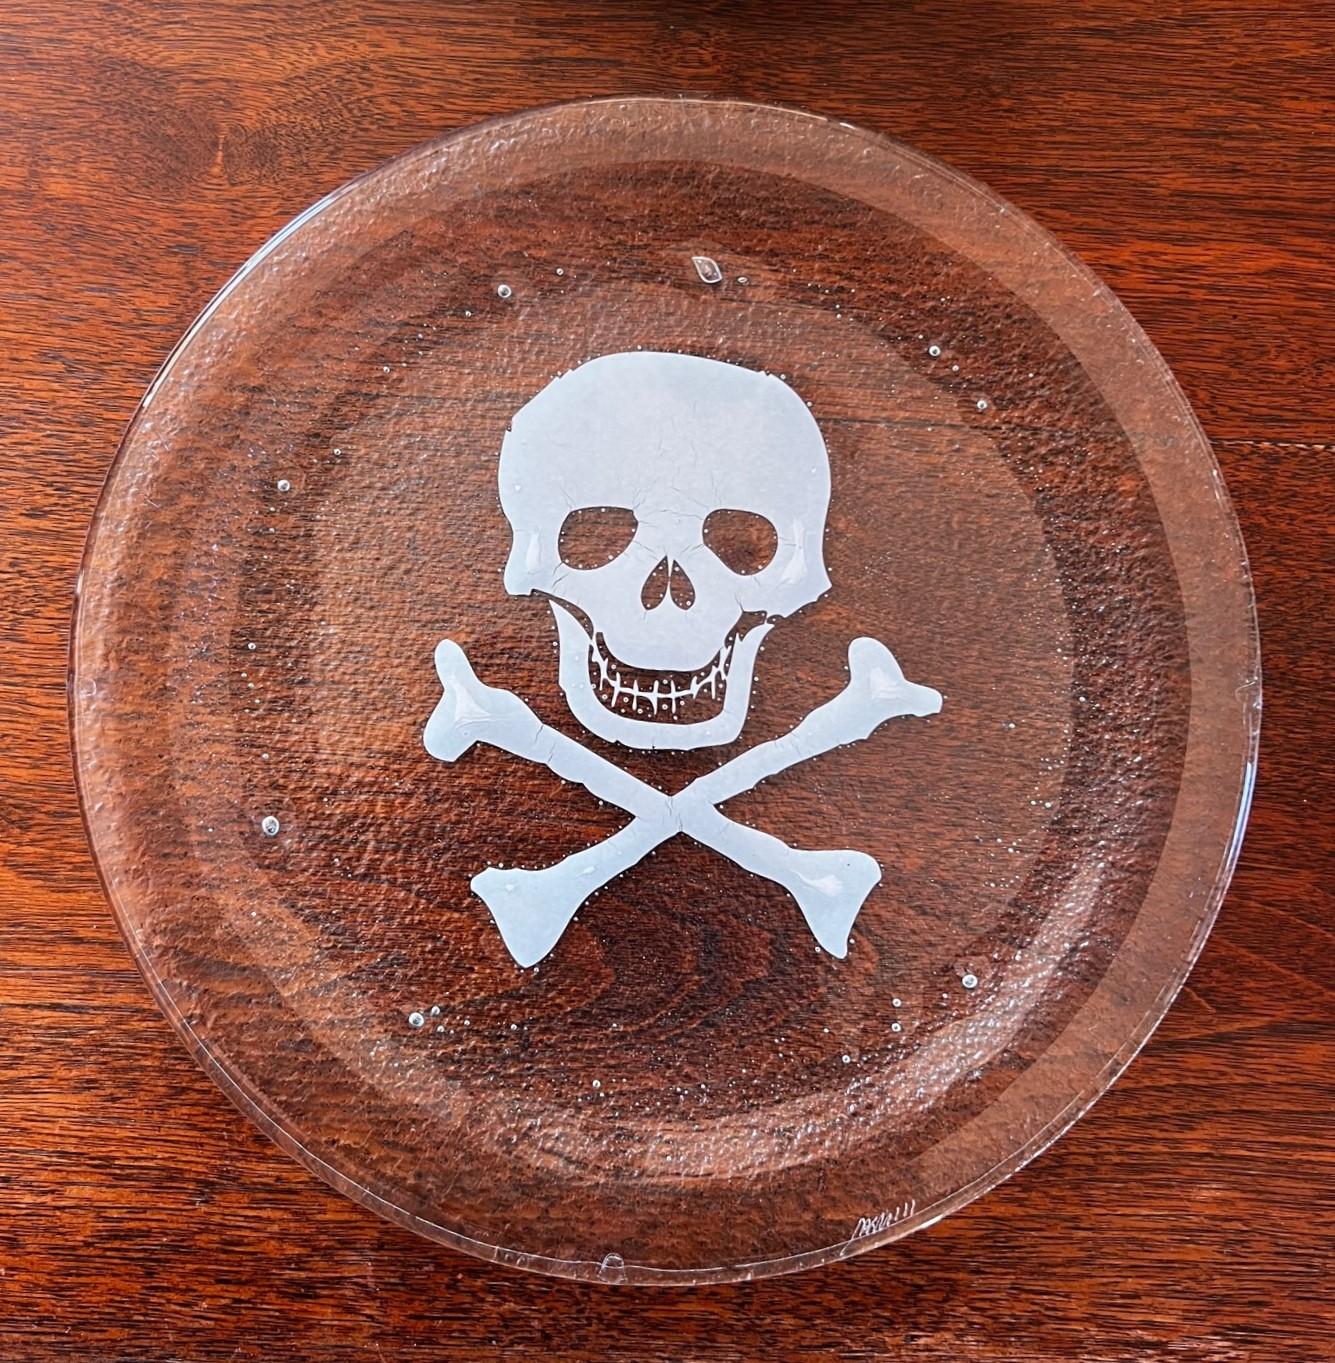 Late 20th C., a set of 8 seeded glass dinner plates with a white skull and crossbones design. These plates are substantial. The skull and crossbone design is incorporated into the seeded glass, not printed on.

Dimensions:
11